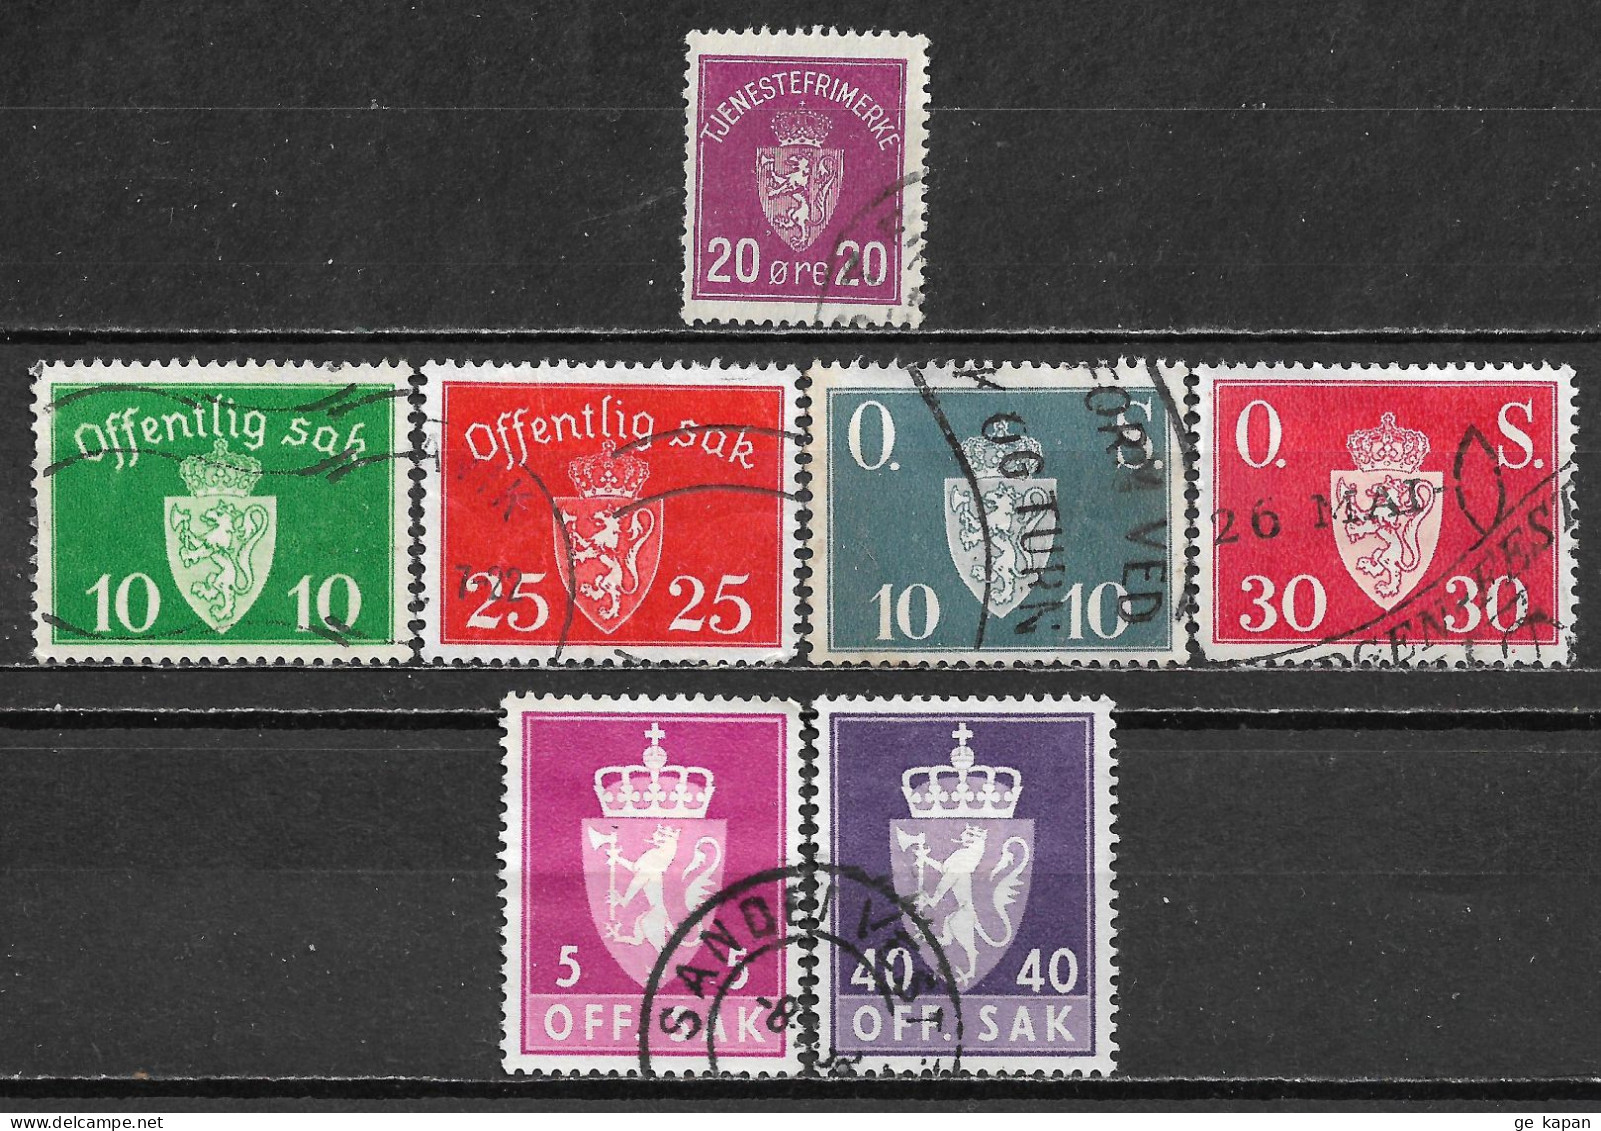 1926-1955 NORWAY SET OF 7 OFFICIAL USED STAMPS (Michel # 4,35,55,62,64,68x,75x) - Dienstzegels